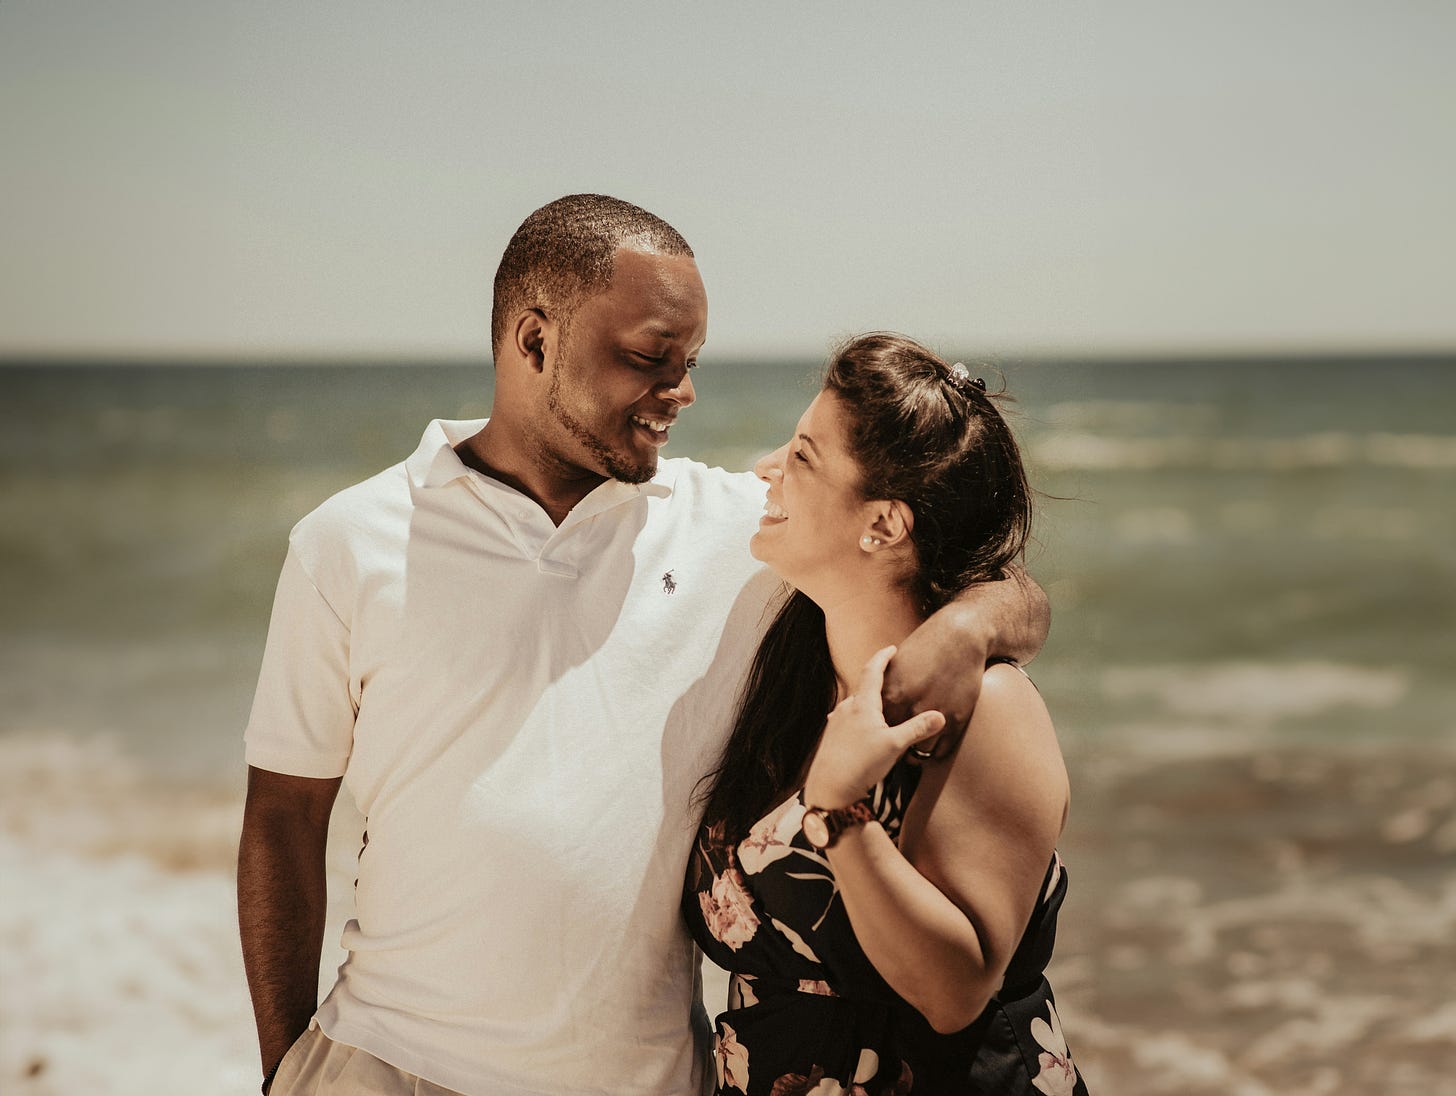 A man and woman smile at each other on a sunny beach. The man has his arm around the woman